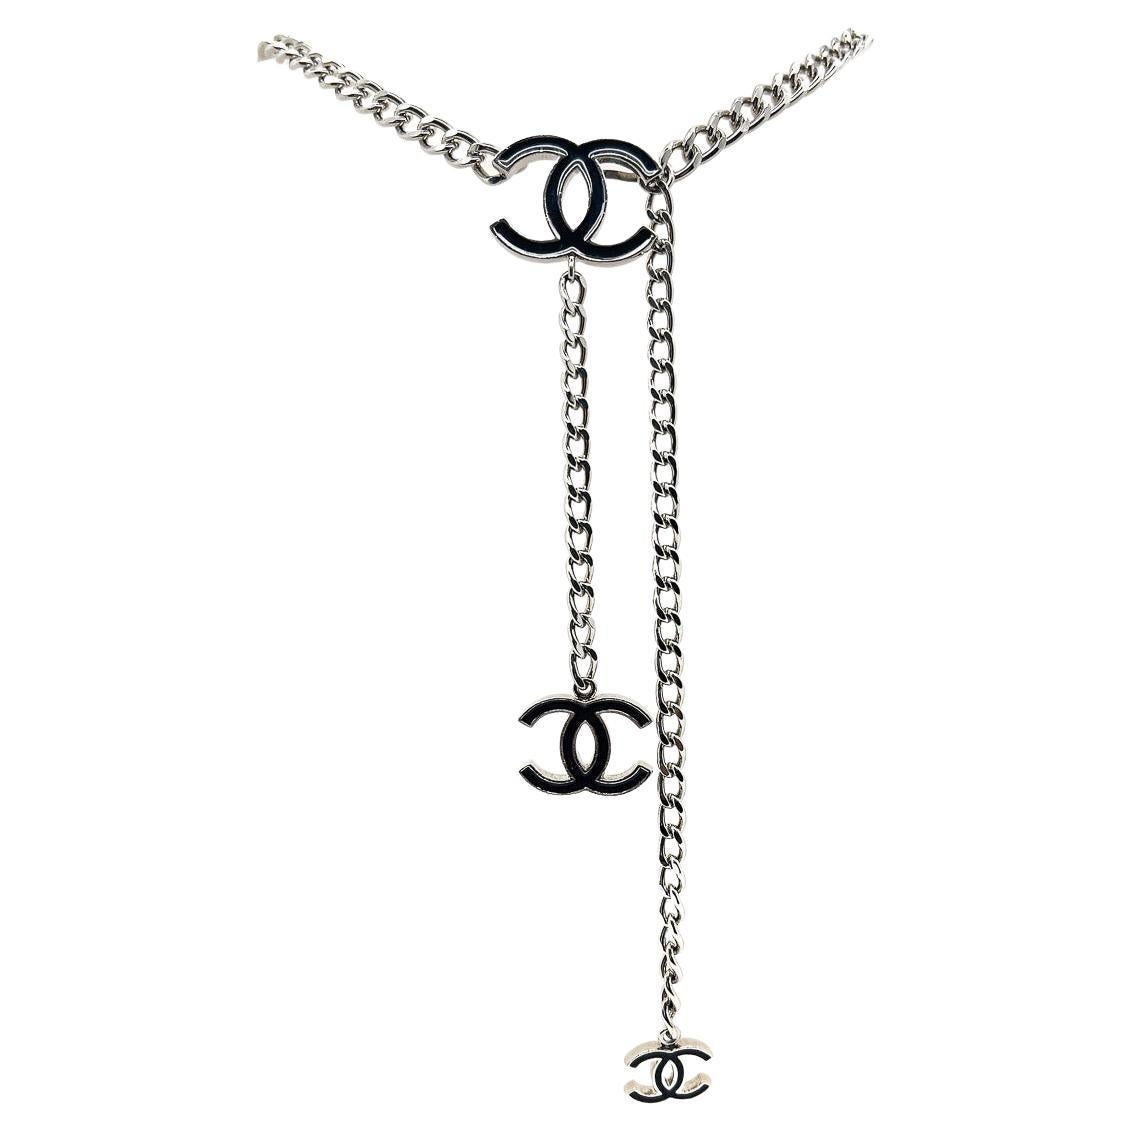 Vintage Chanel Double CC Chunky Chain Necklace 2004 In Good Condition For Sale In Wilmslow, GB